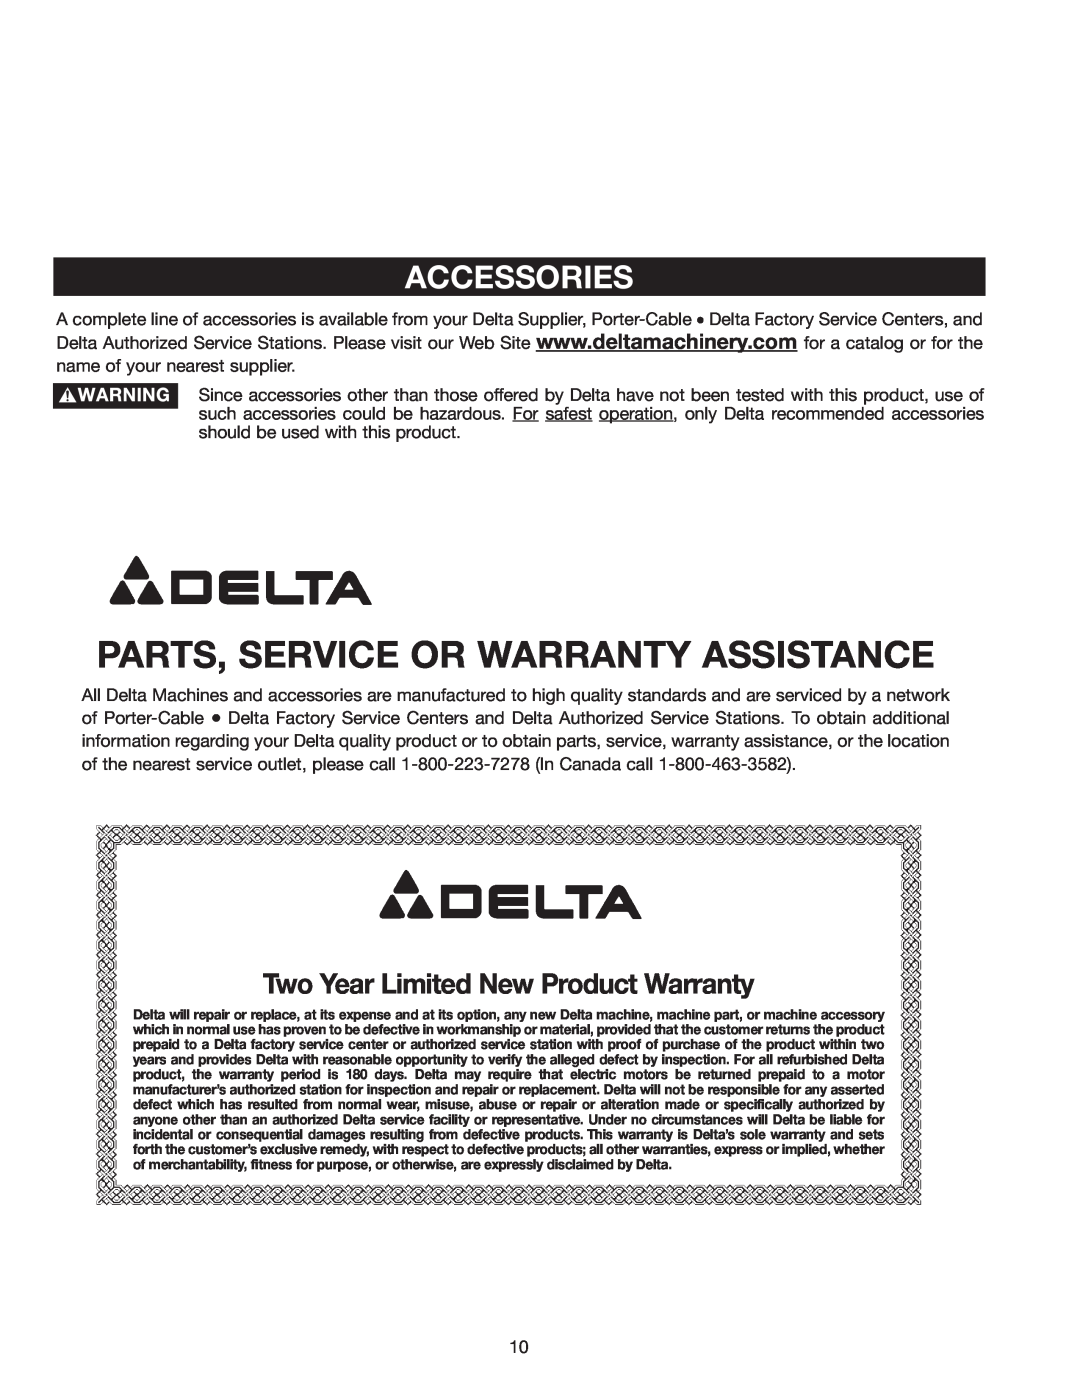 Delta 50-875 instruction manual Parts, Service Or Warranty Assistance, Accessories, Two Year Limited New Product Warranty 